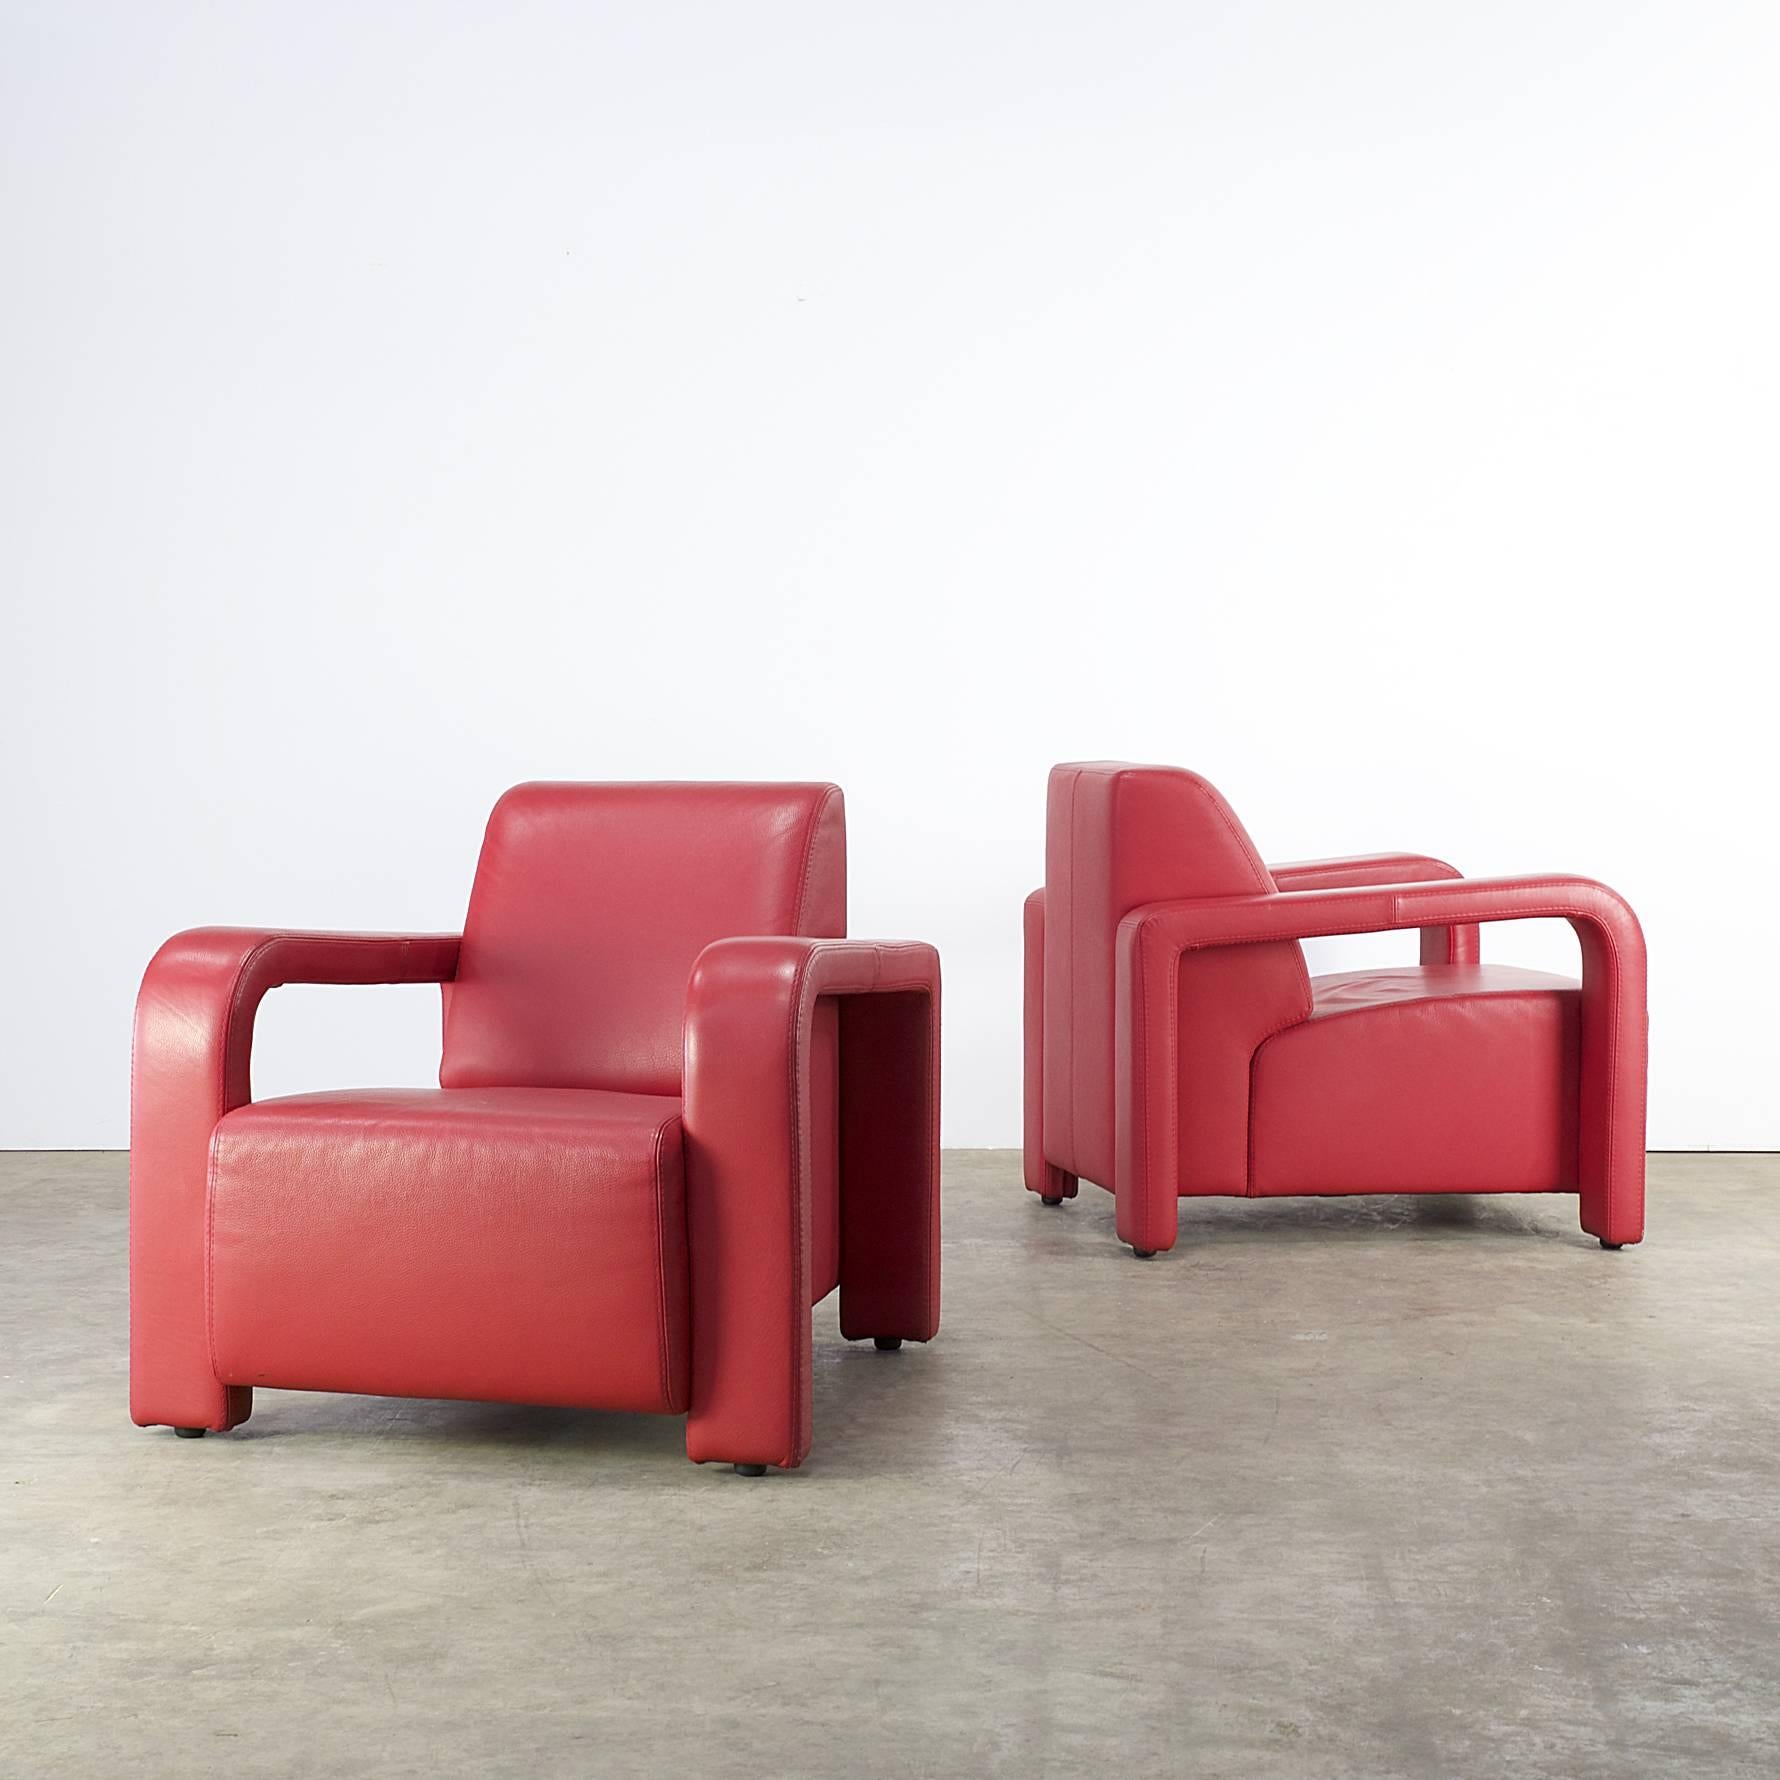 Set of two comfortable lounge chairs for Marinelli, Italy, from the 1980s. These lounge chairs are extremely comfortable to sit in. The set has a very solid and heavy frame and original upholstery in beautiful colored red leather, signed